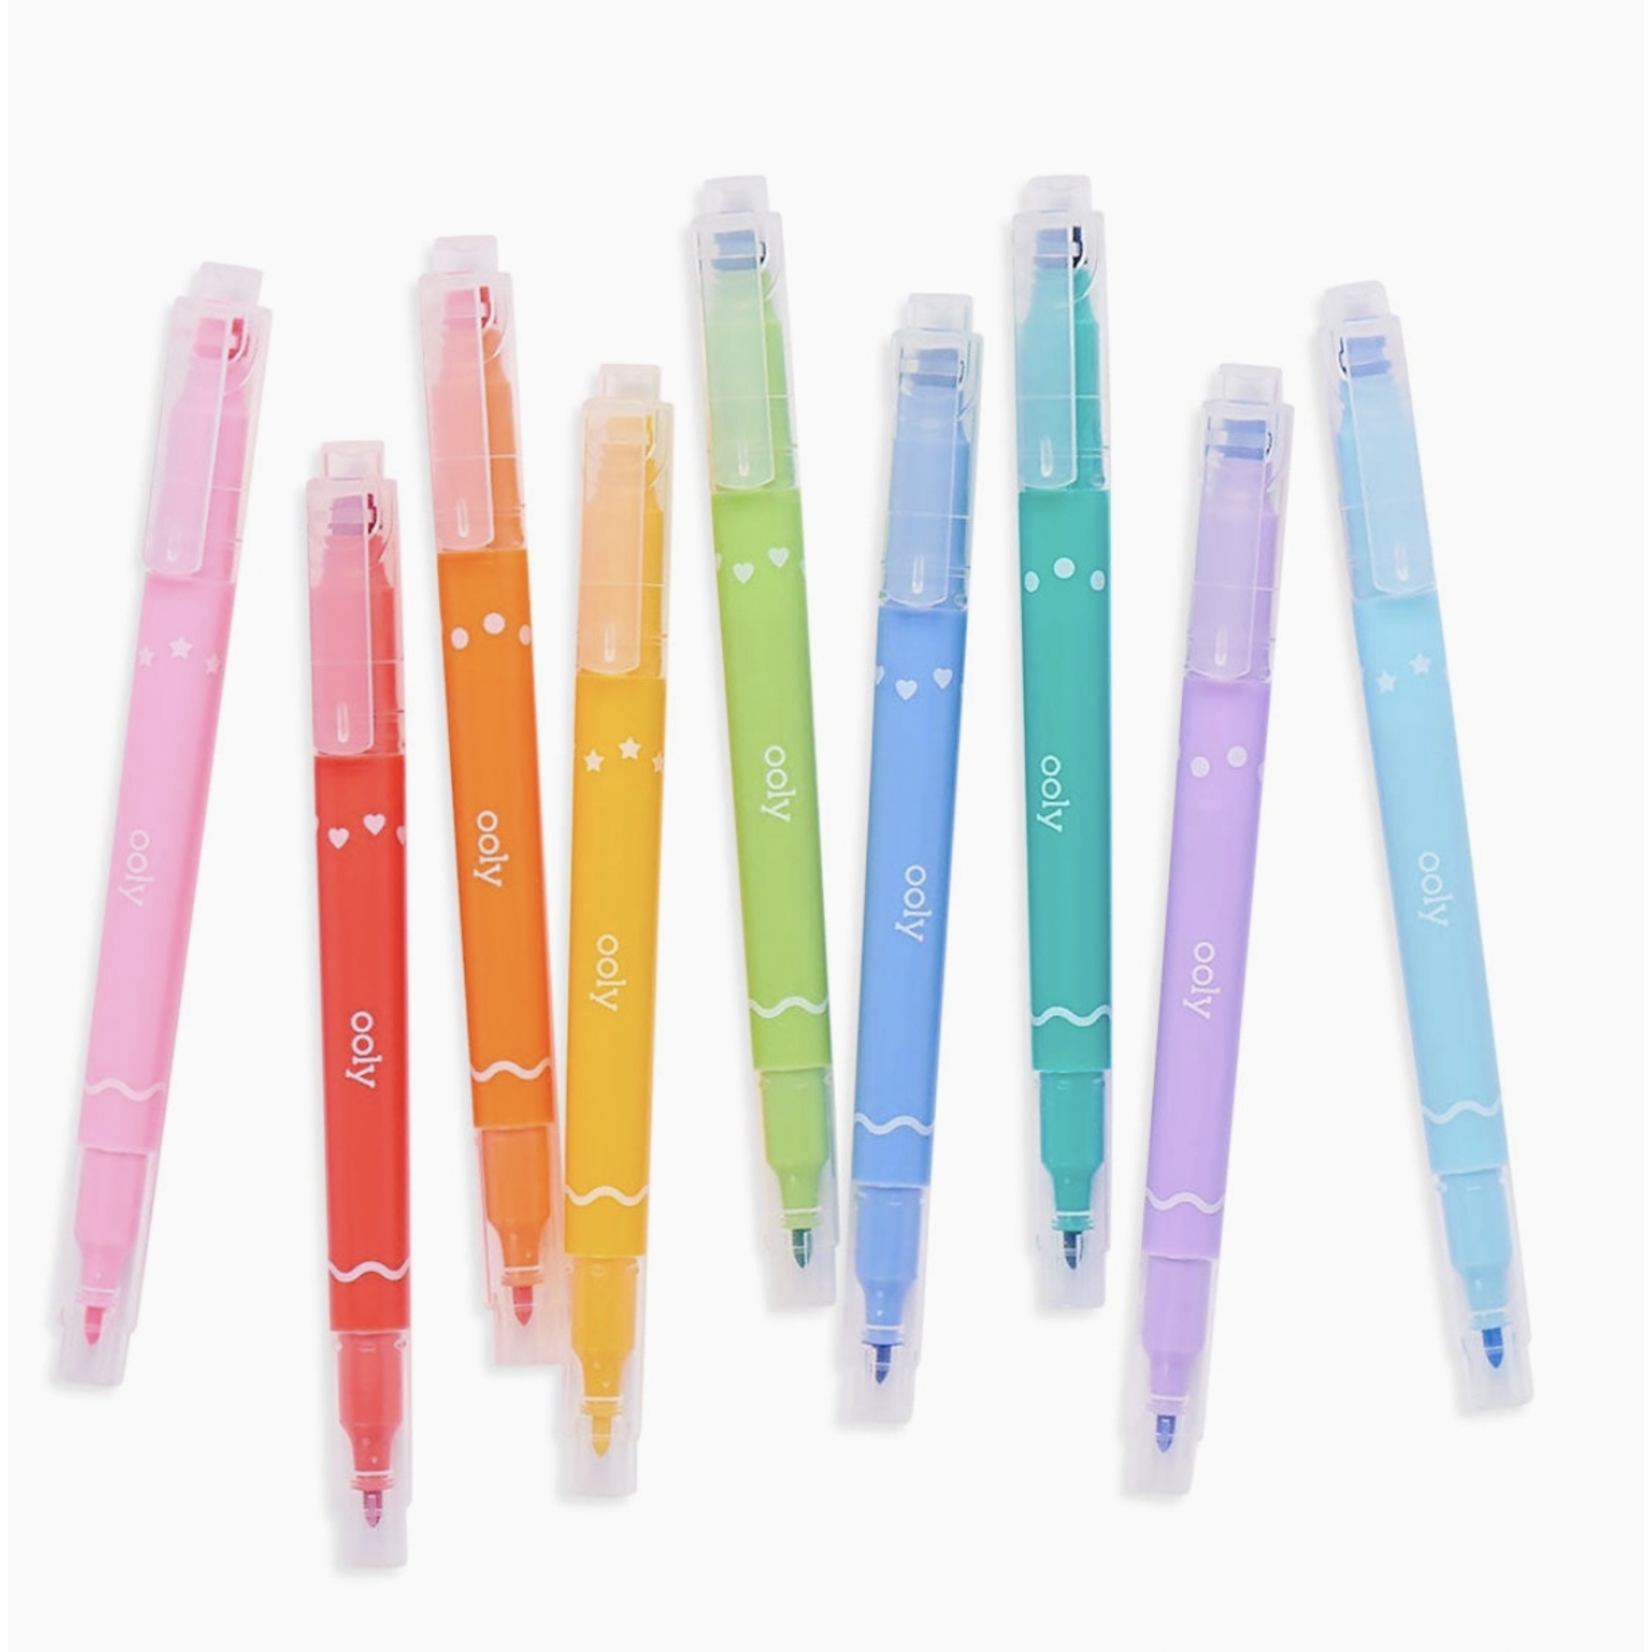 OOLY Confetti Stamp Double-Ended Markers - Set of 9